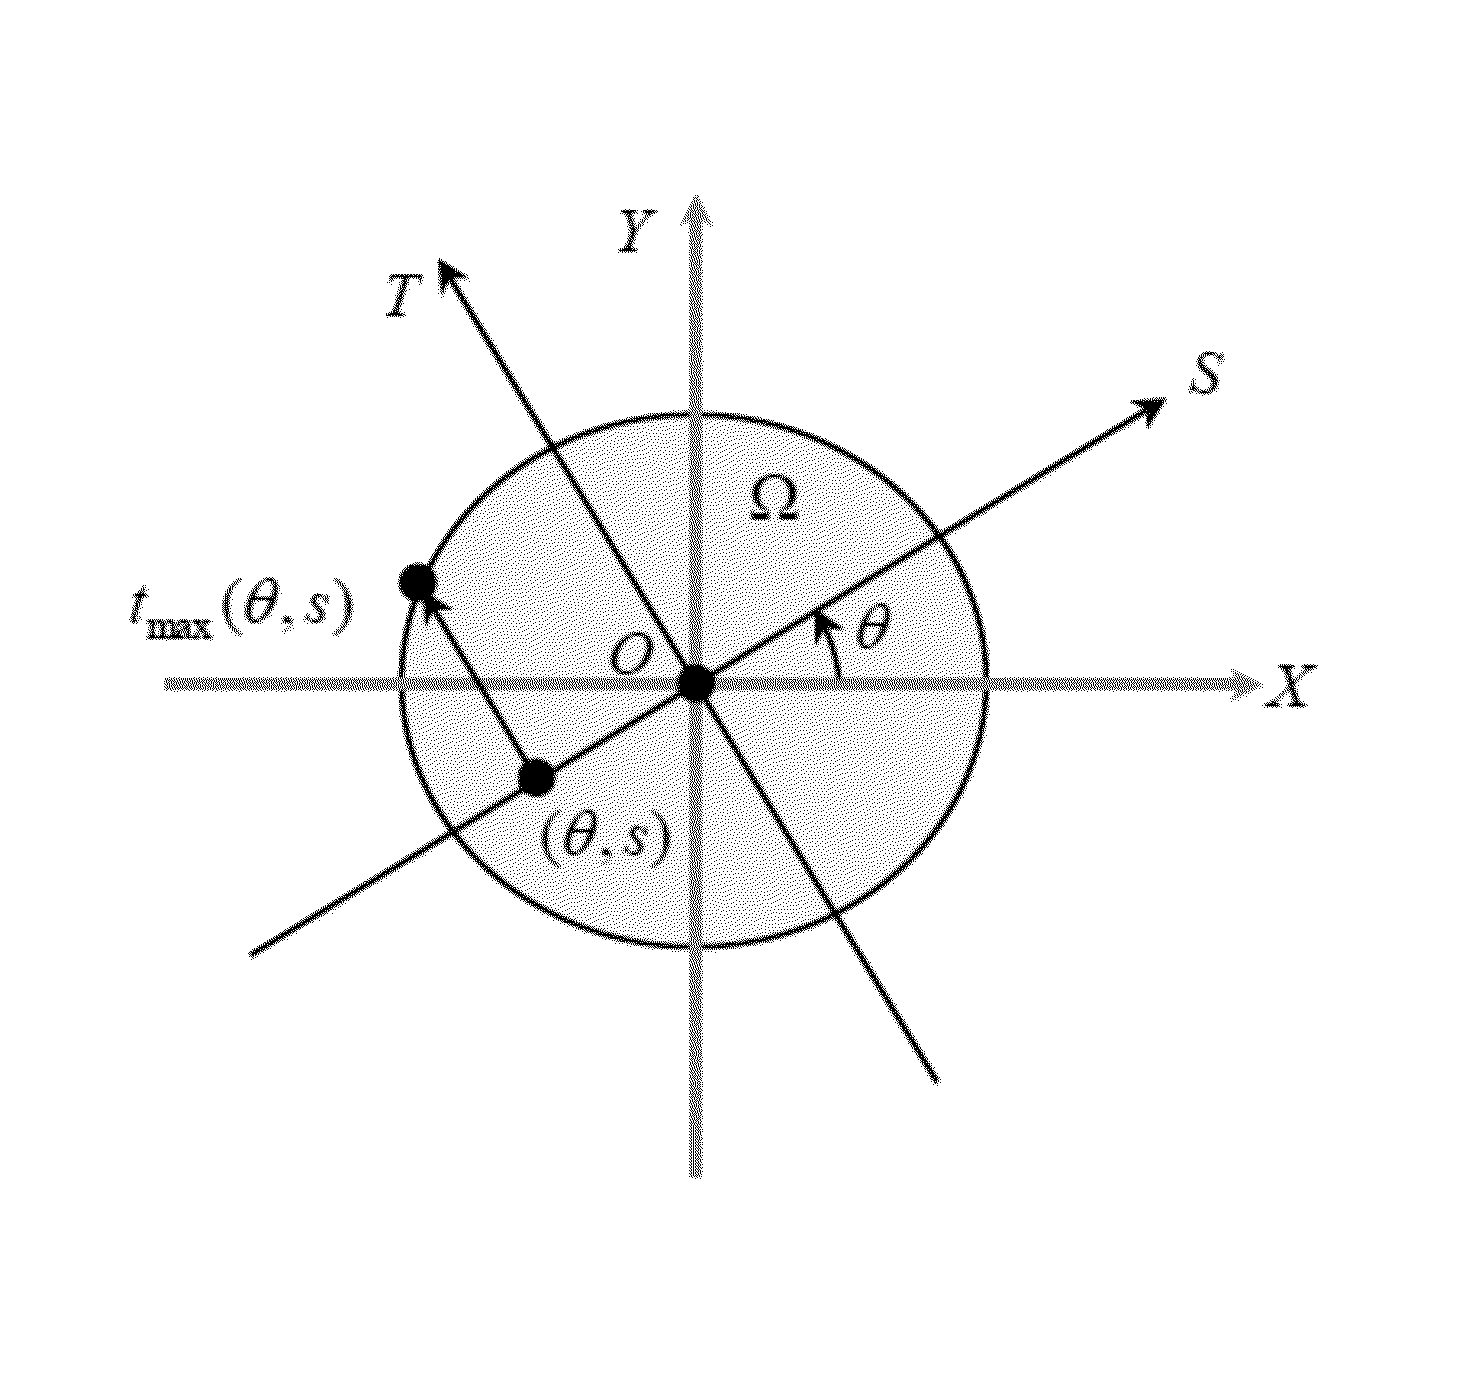 Methods for improved single photon emission computed tomography using exact and stable region of interest reconstructions